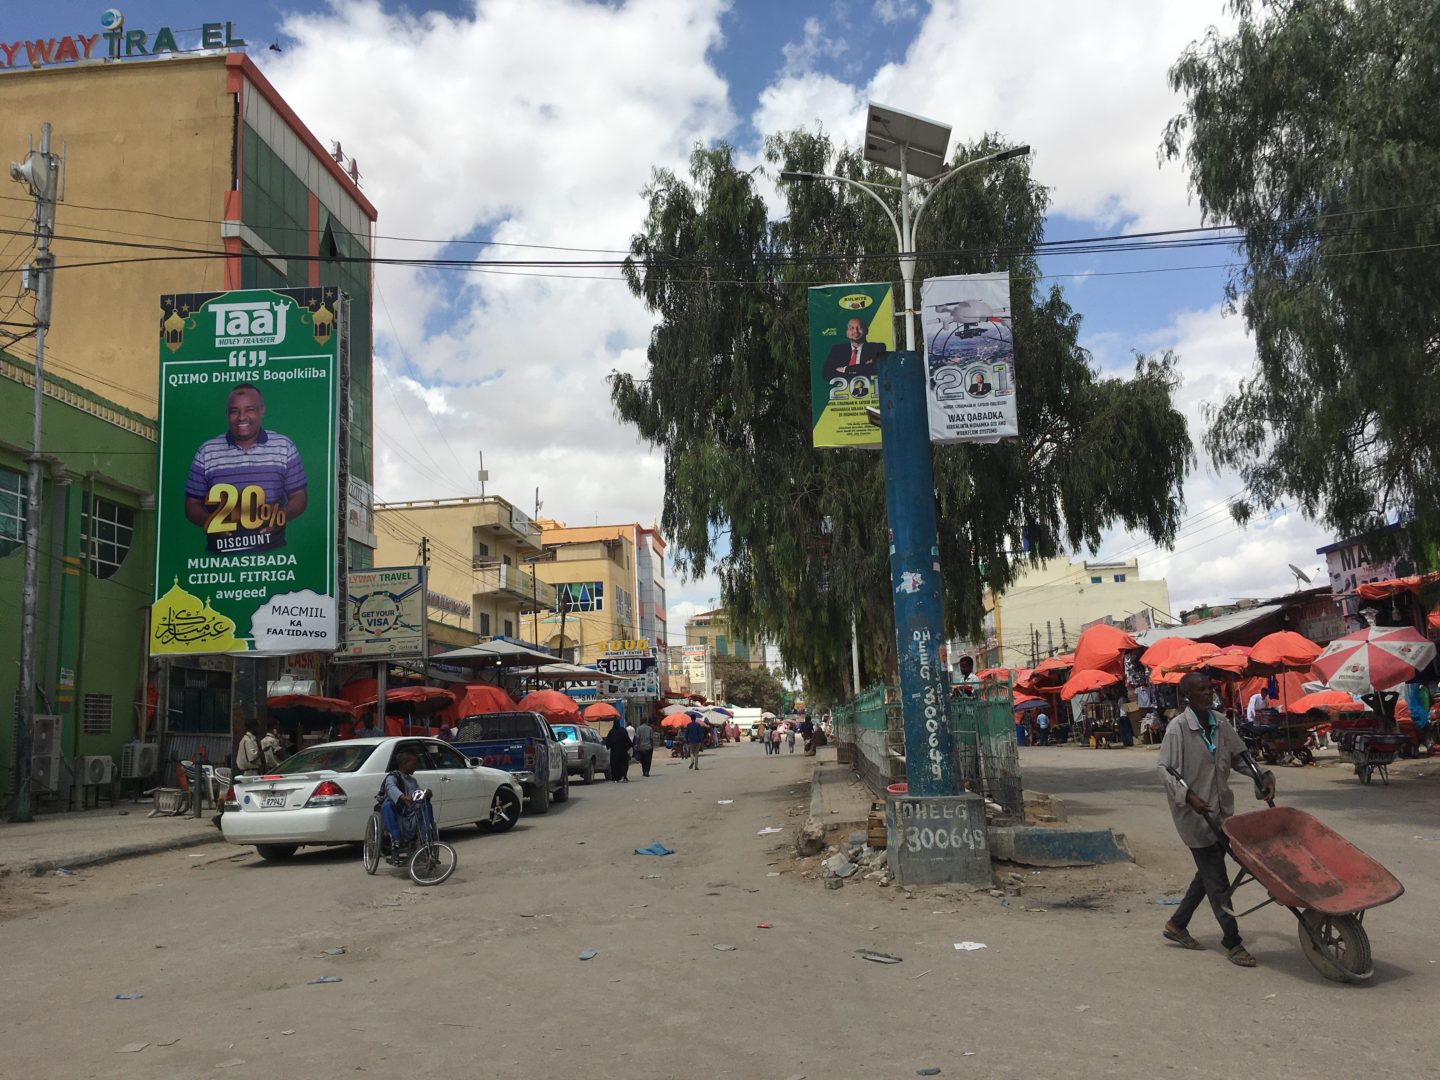 The city centre in Hargeisa on the final day of campaigning. Photo credit: Ben Ezeamalu